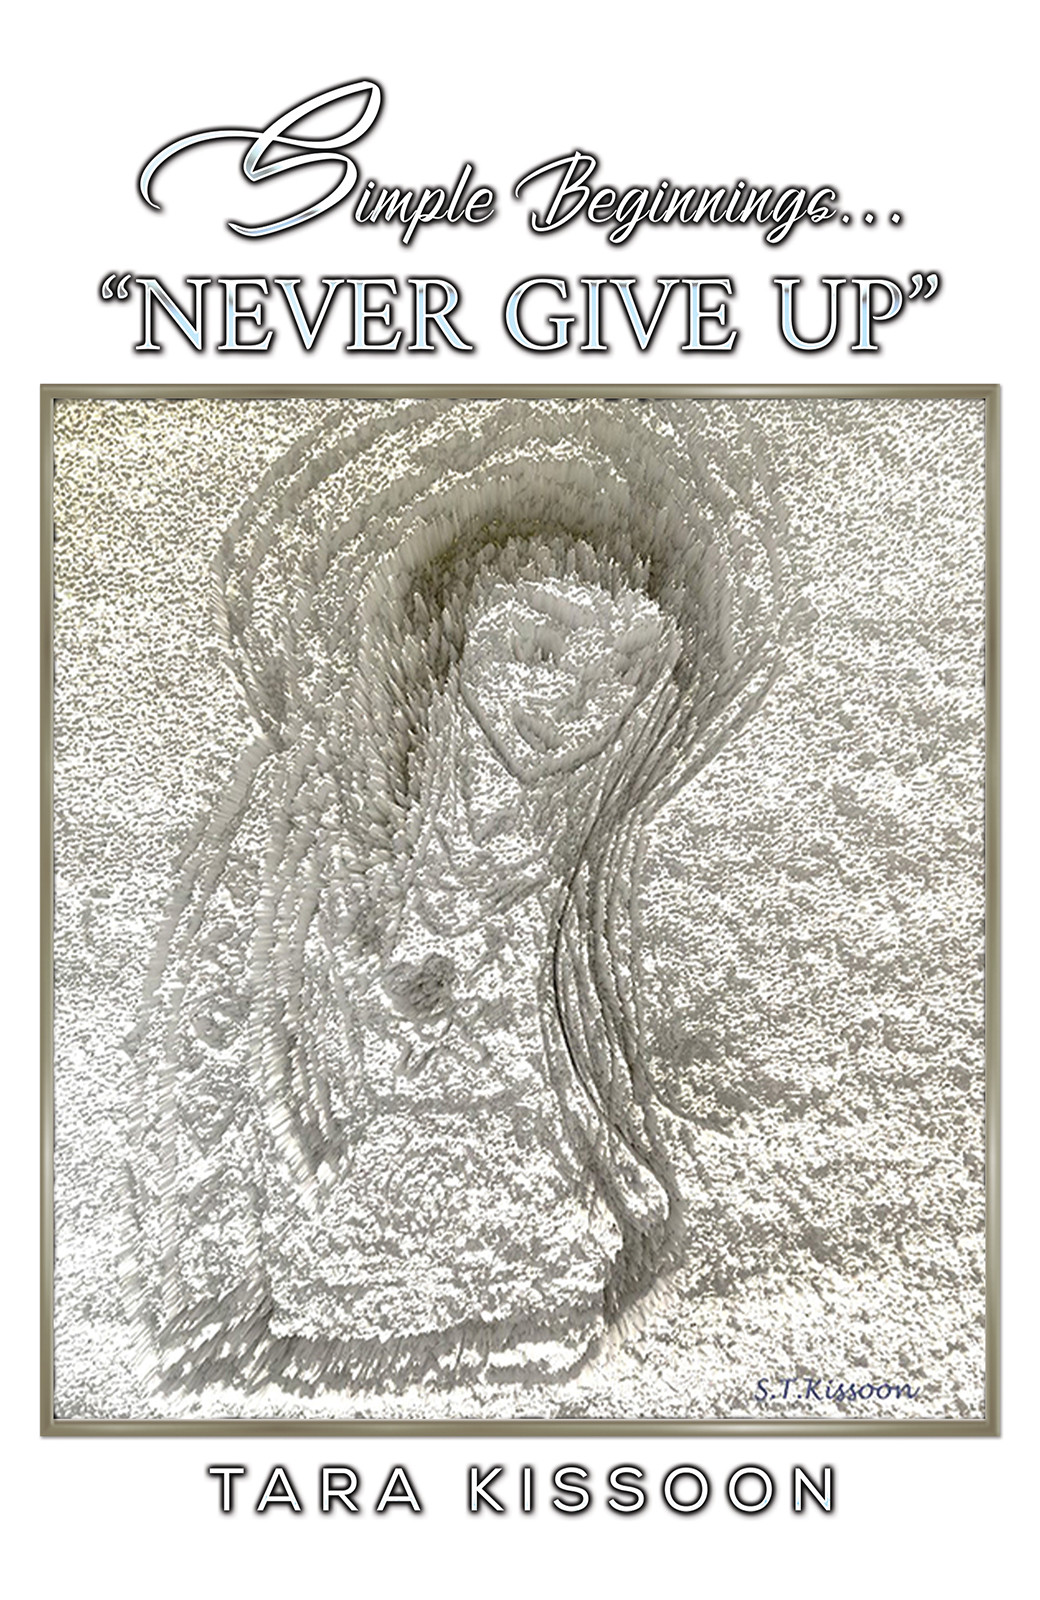 Simple Beginnings... "Never Give Up"-bookcover